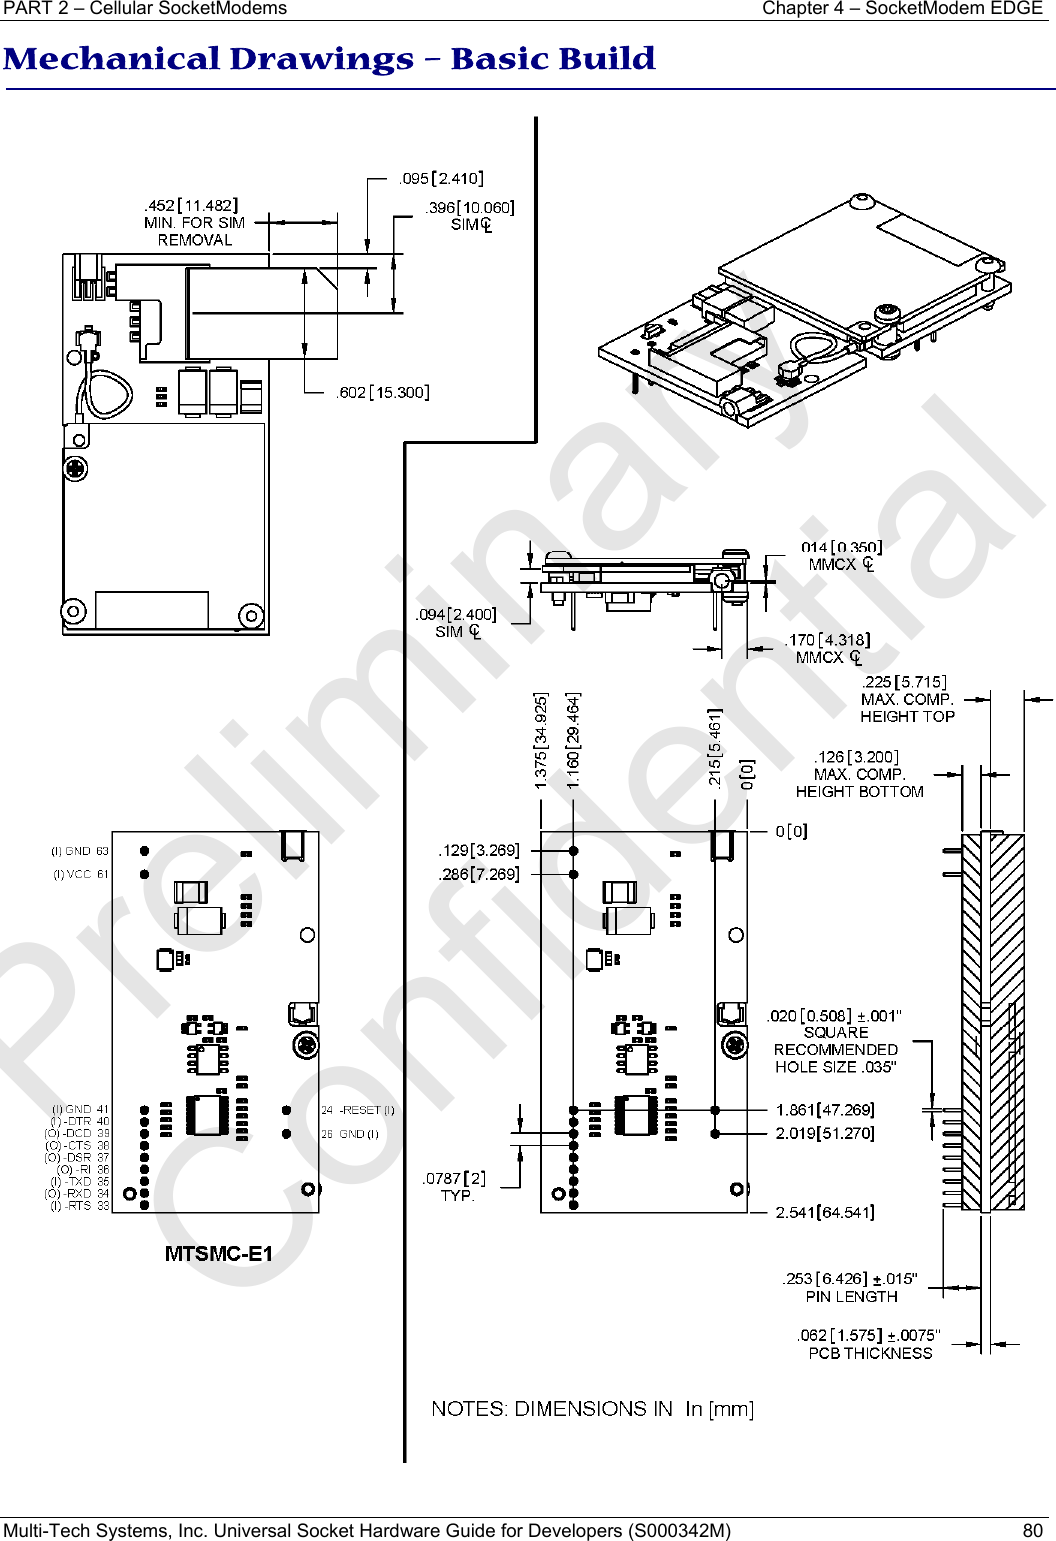 PART 2 – Cellular SocketModems  Chapter 4 – SocketModem EDGE Multi-Tech Systems, Inc. Universal Socket Hardware Guide for Developers (S000342M)  80  Mechanical Drawings – Basic Build  Preliminary  Confidential